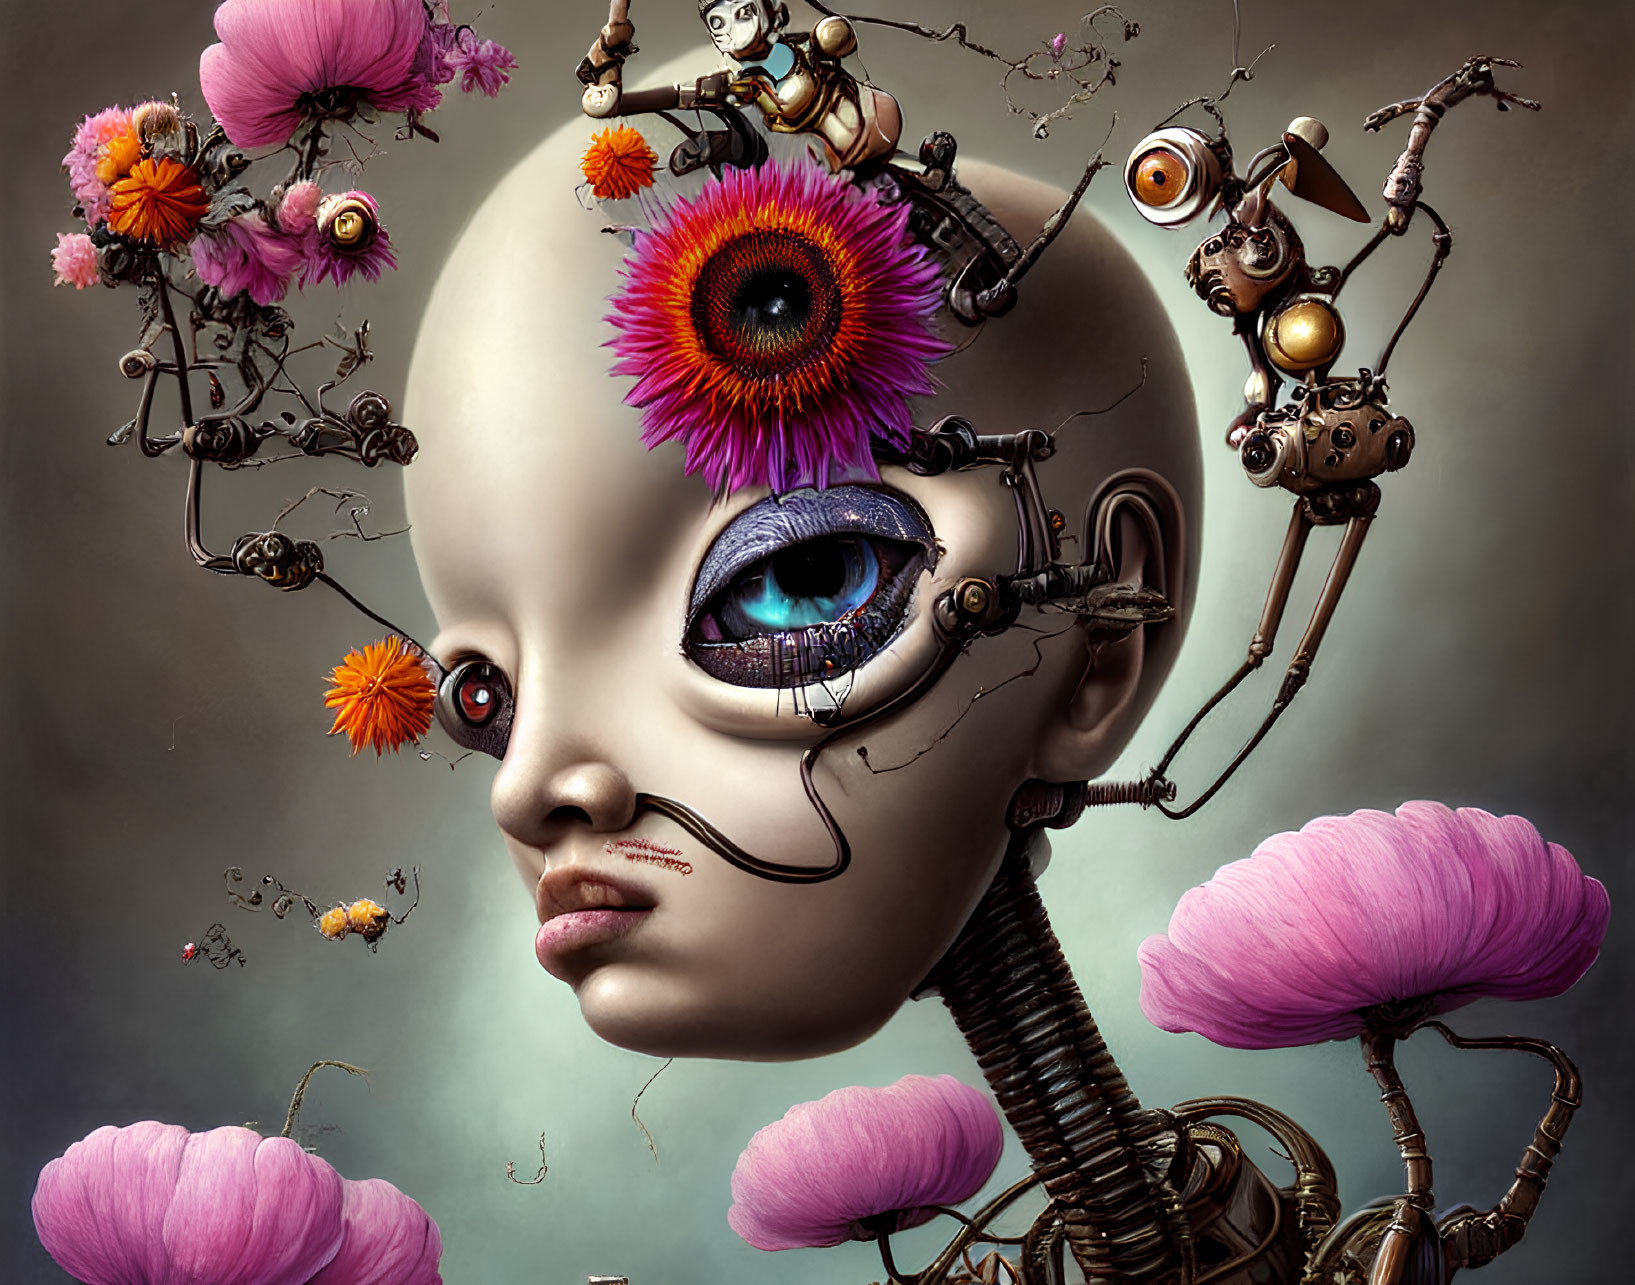 Surreal artwork: bald robotic humanoid head with vibrant flowers and blue eye